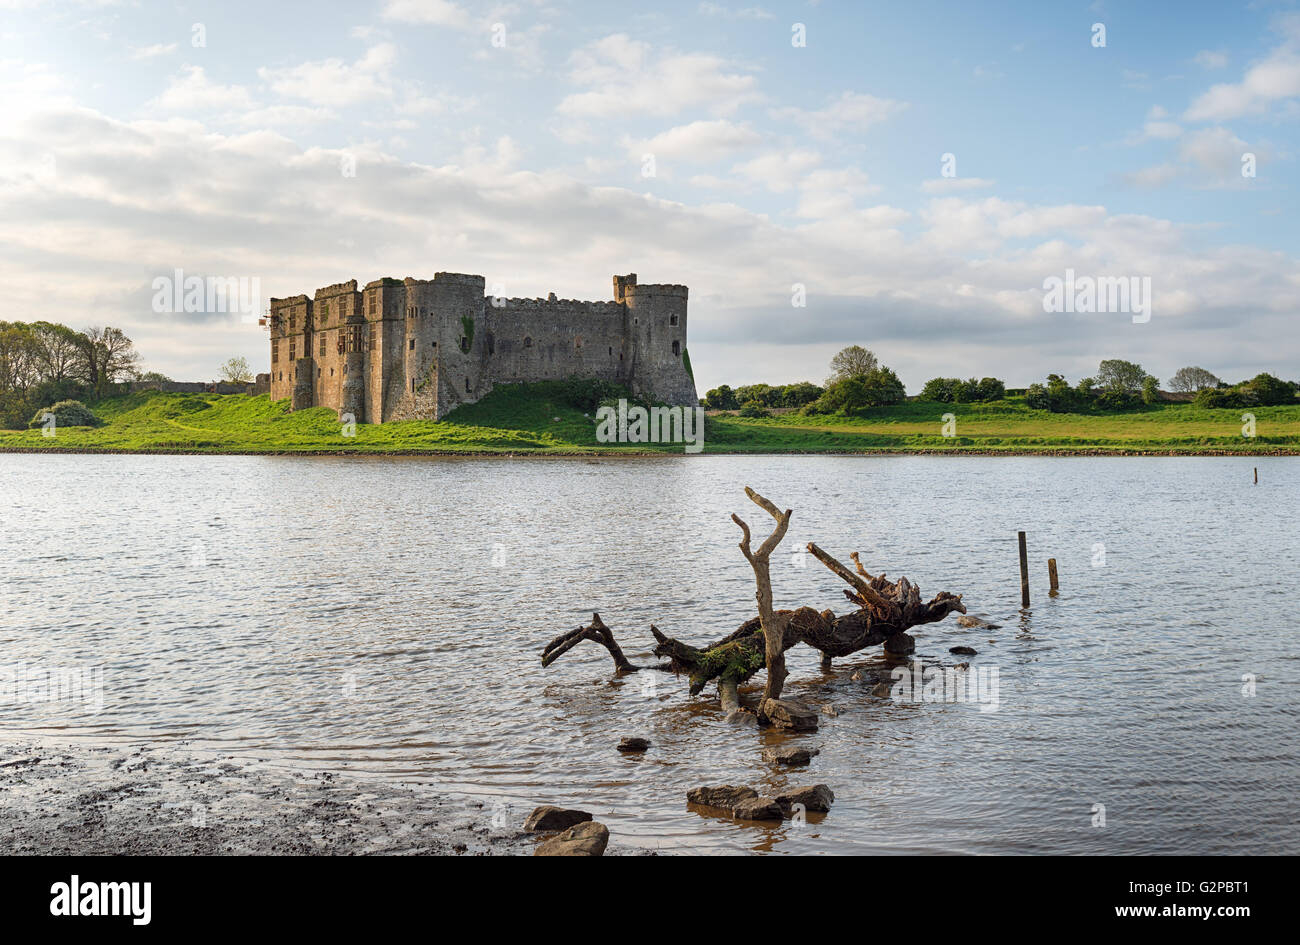 Carew castle on the banks of an inlet of the Carew River in Pembrokeshire, Wales Stock Photo